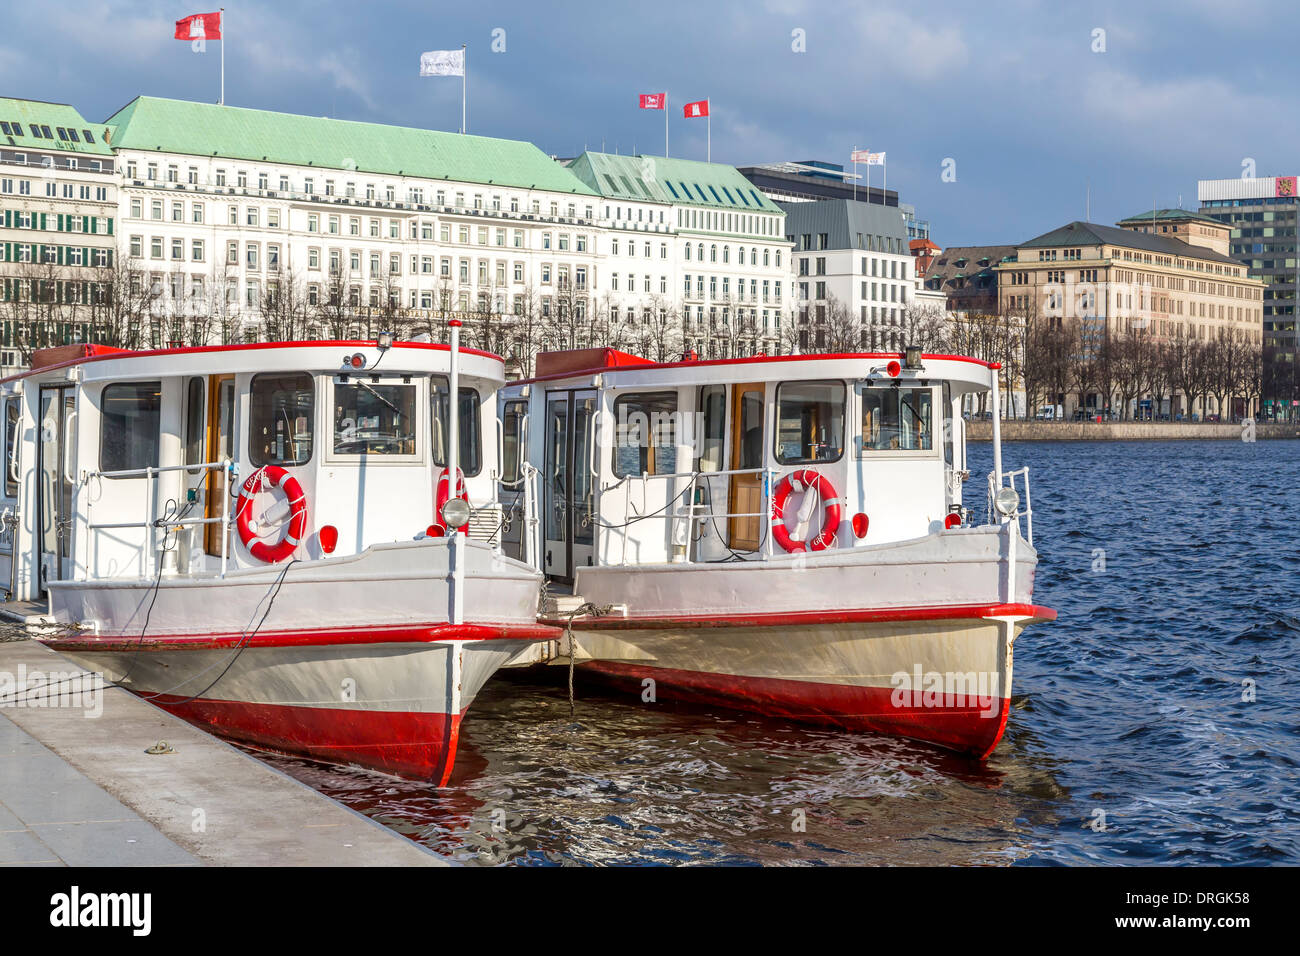 Old city of Hamburg and the Alster, ship, Germany Stock Photo